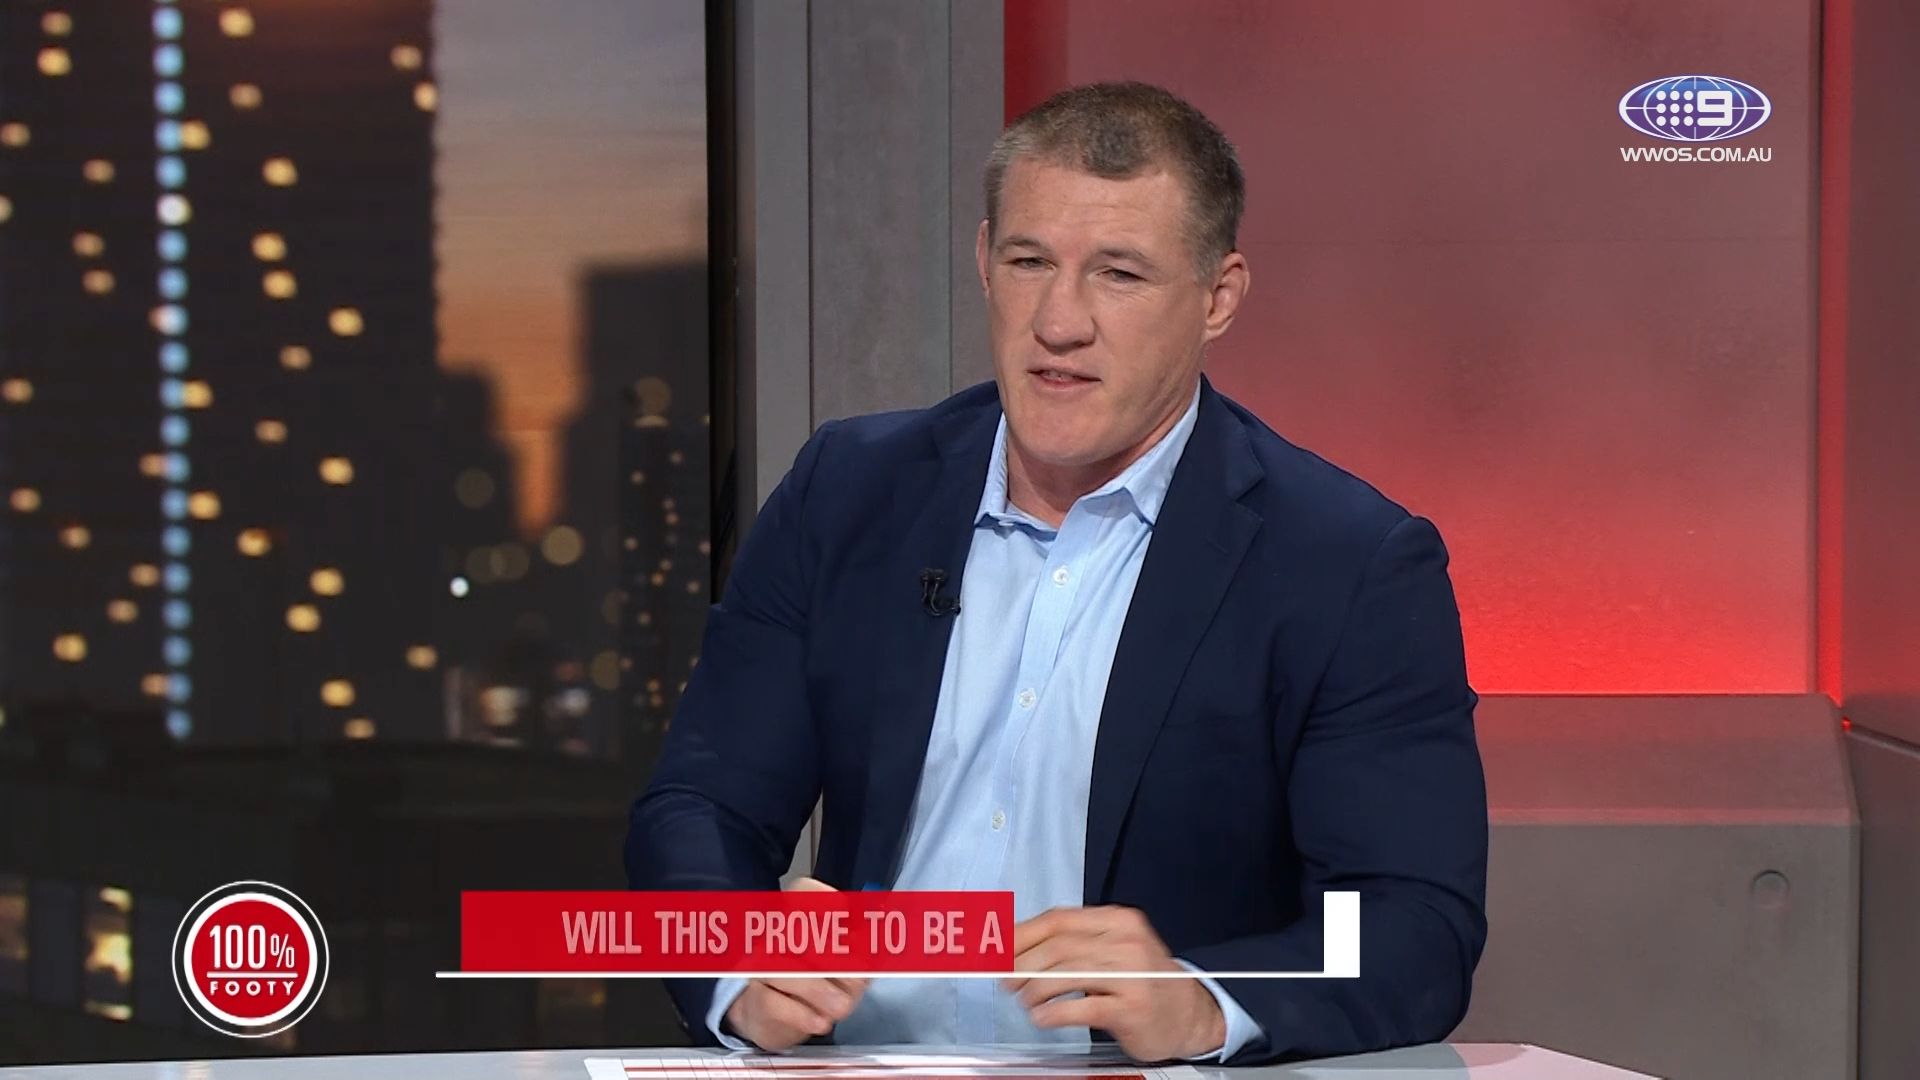 'It's a risk': Paul Gallen's major question over Tino ﻿Fa'asuamaleaui 10-year deal